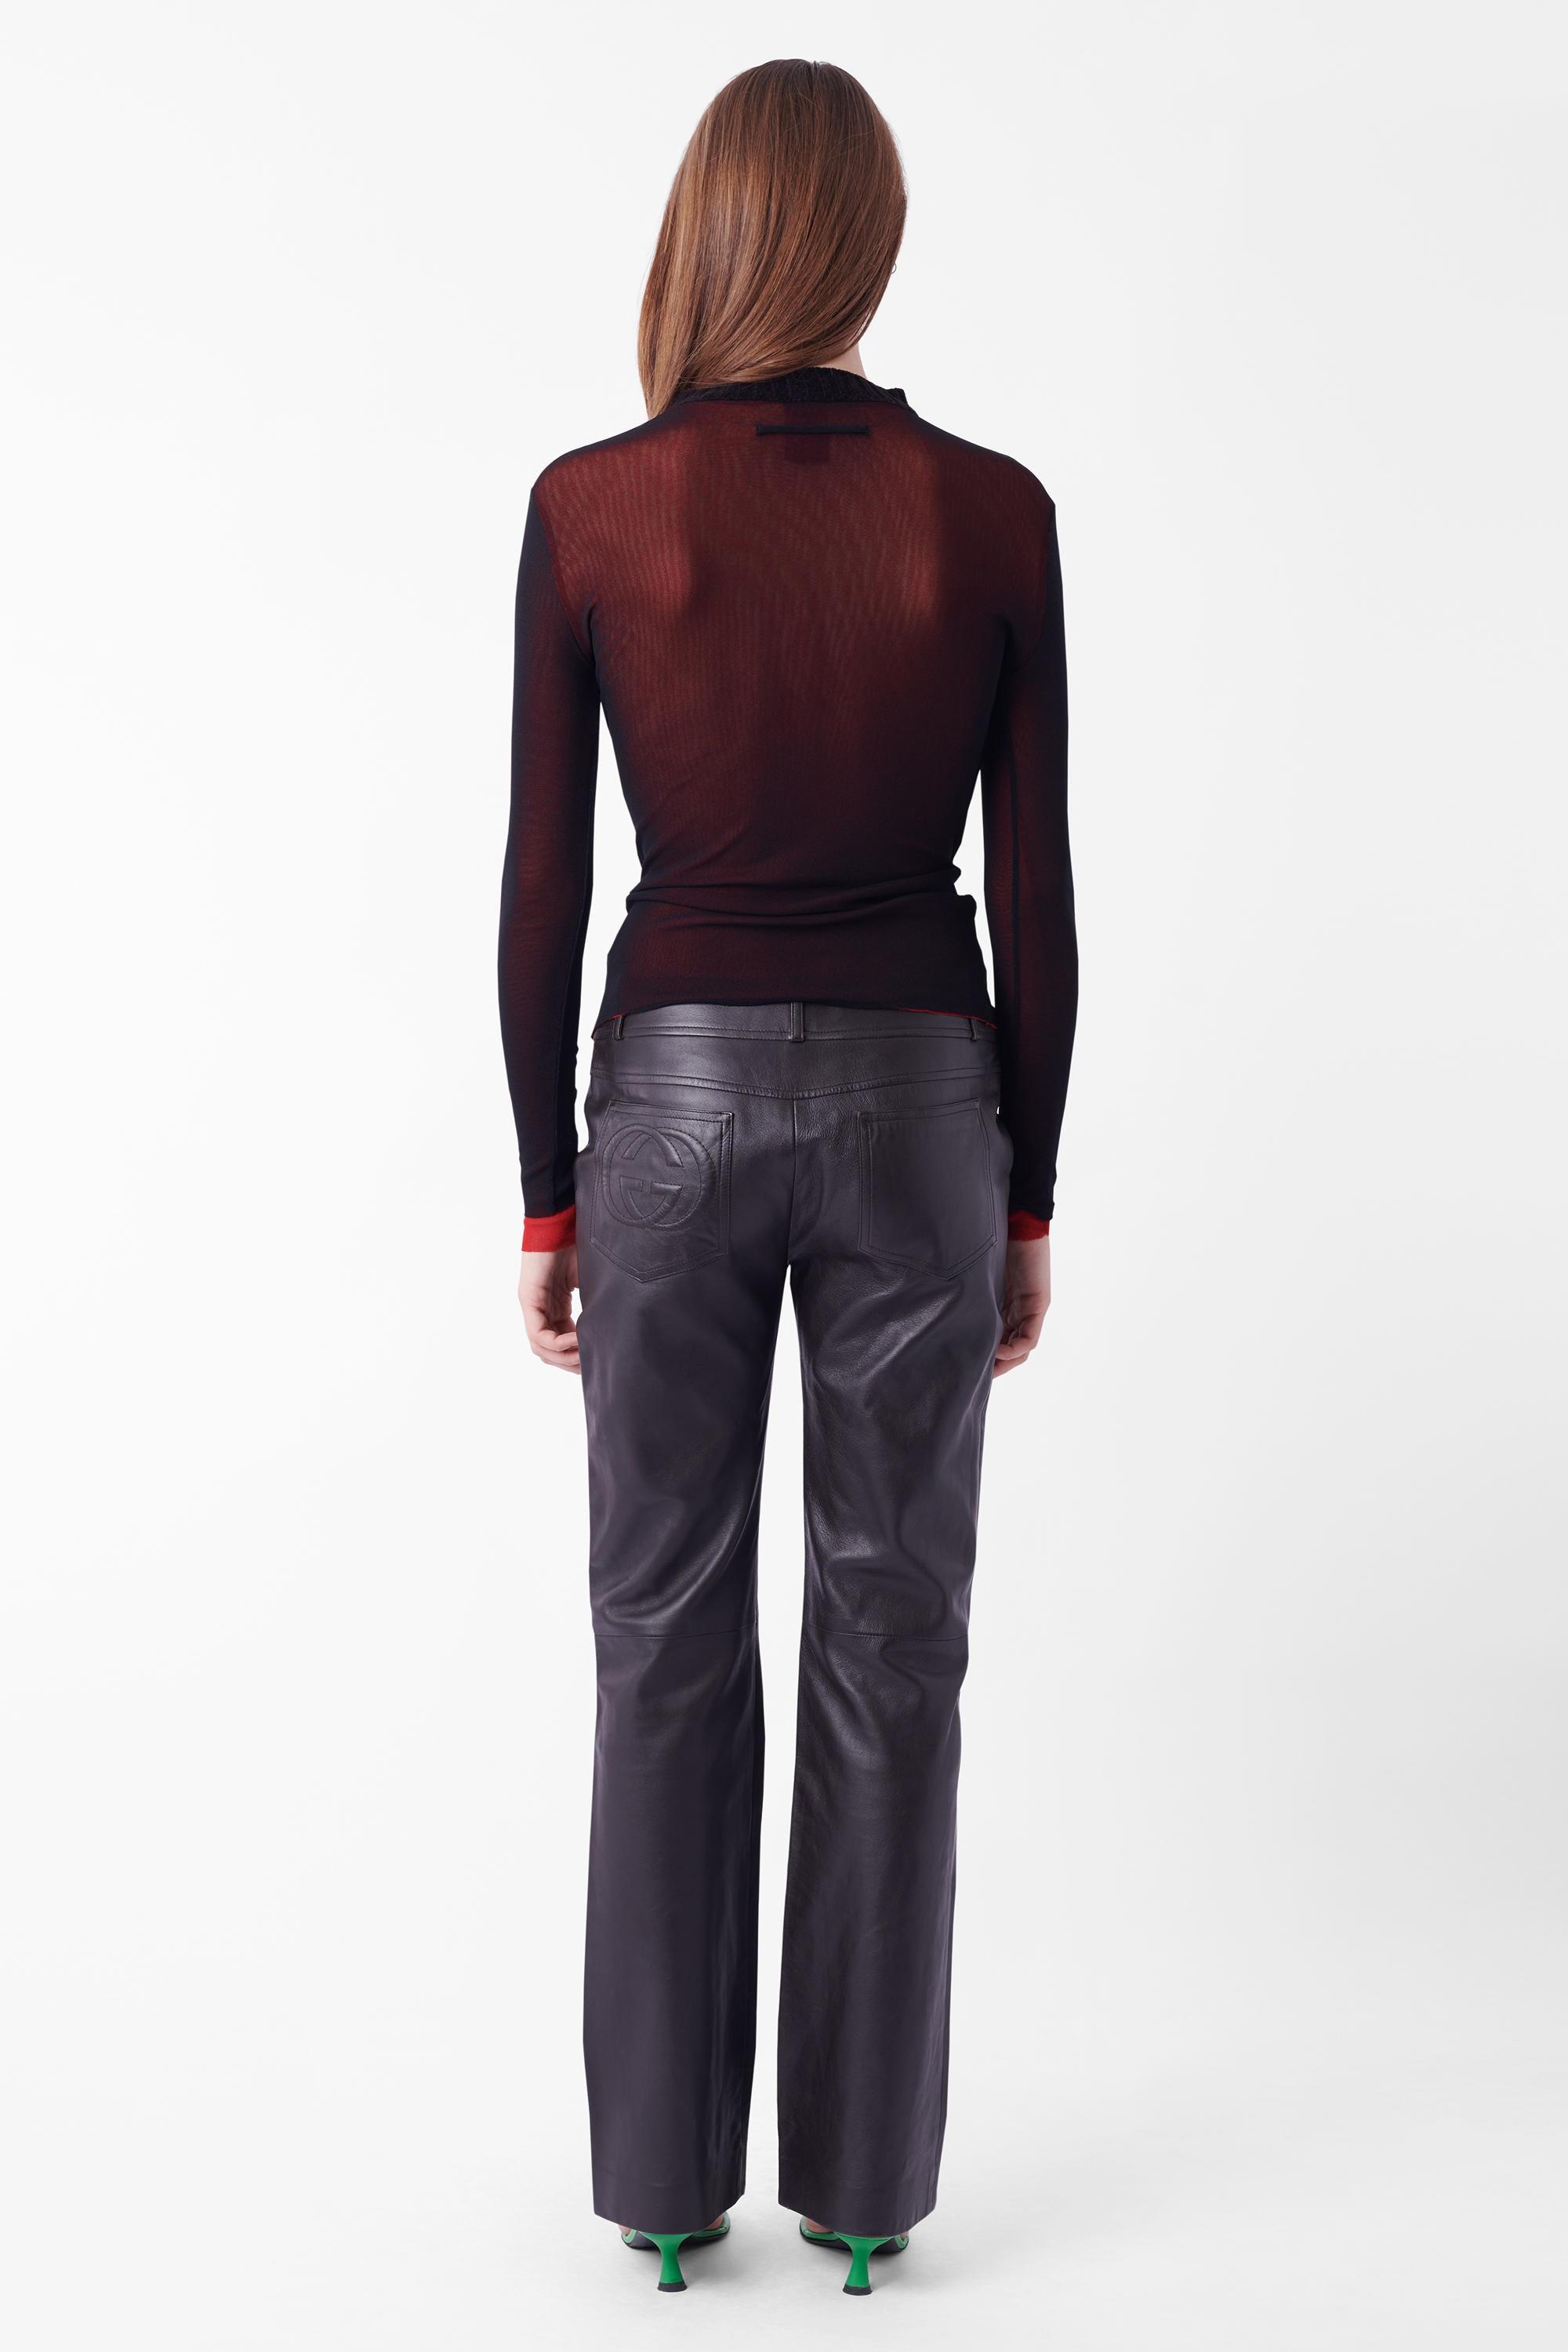 We are excited to present this Tom Ford for Gucci Fall Winter 2003 GG logo leather trousers. Features two front and back operational pockets, front zips at pocket, belt loop detailing, GG embossed leather on back pocket. In excellent vintage